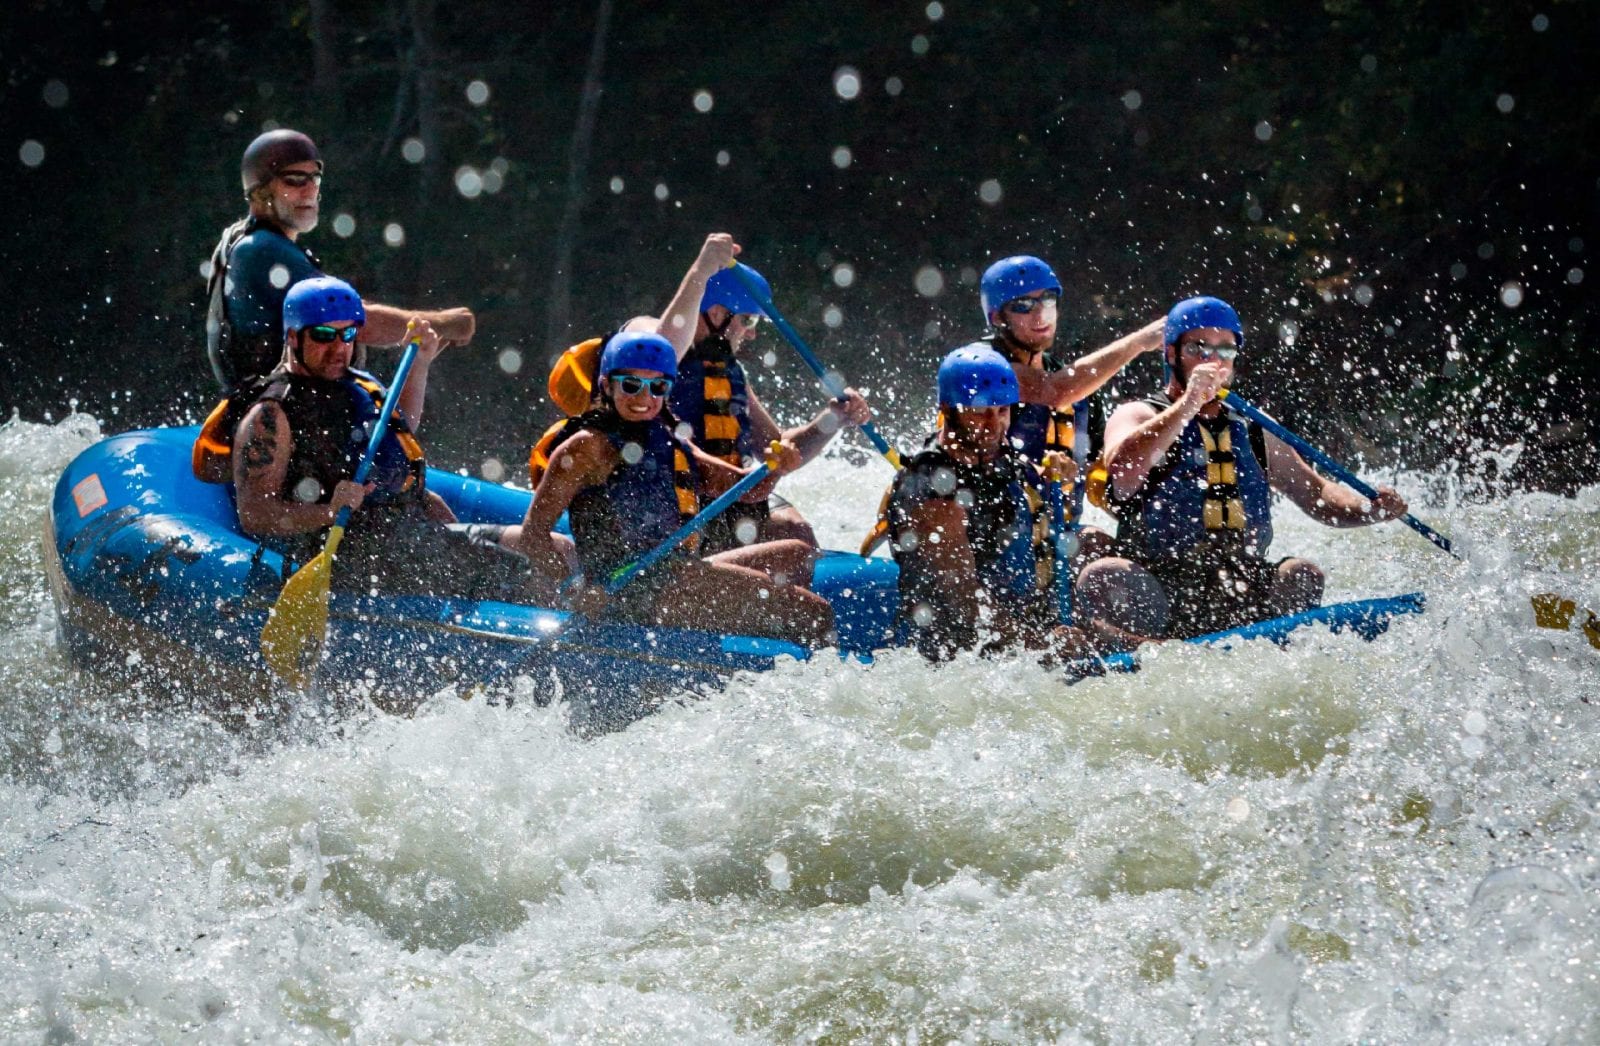 A team smiles and paddles during a day of west virginia whitewater rafting on the upper gauley river with ace adventure resort.